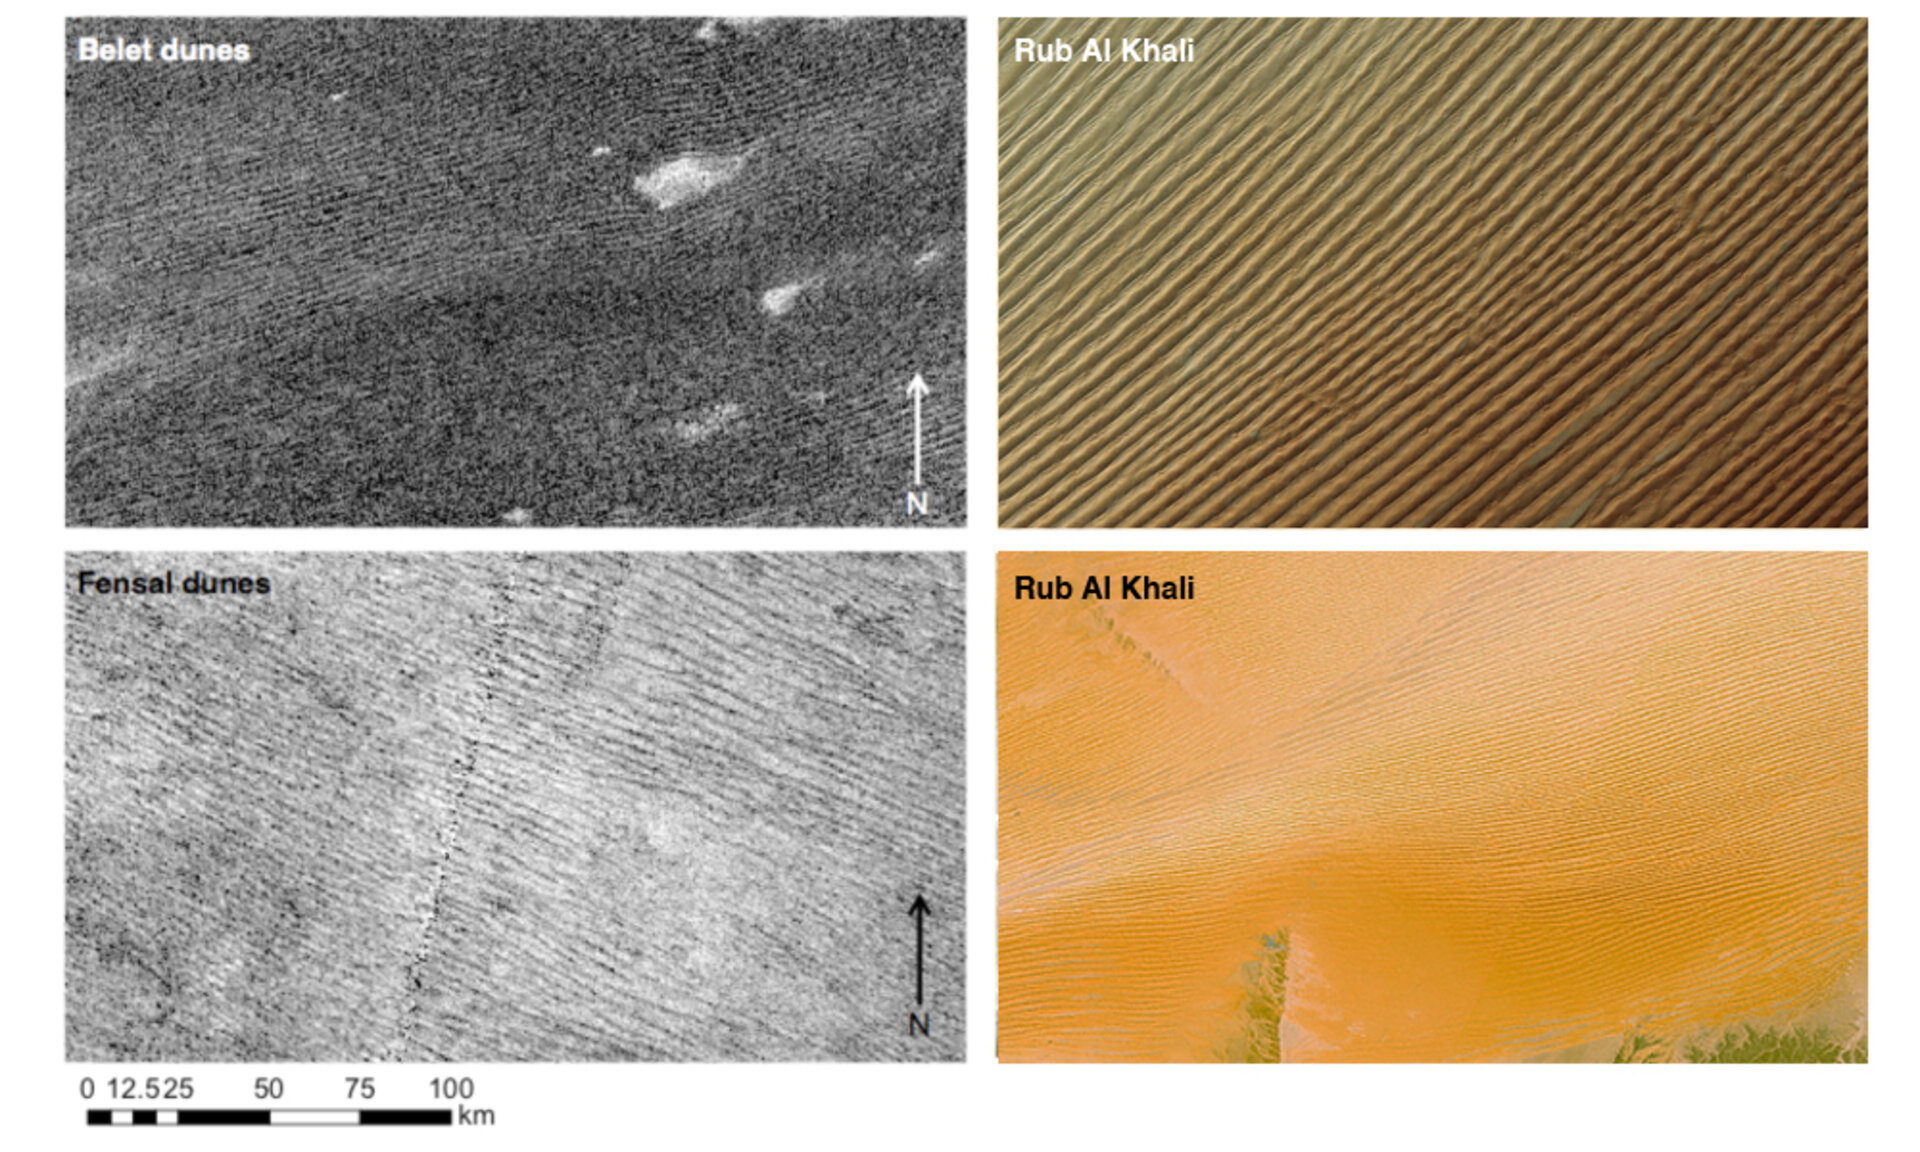 Two different dune fields on Titan: Belet and Fensal, as imaged by Cassini’s radar. It also shows two similar dune fields on Earth in Rub Al Khali, Saudi Arabia. CREDIT NASA/JPL–Caltech/ASI/ESA and USGS/ESA